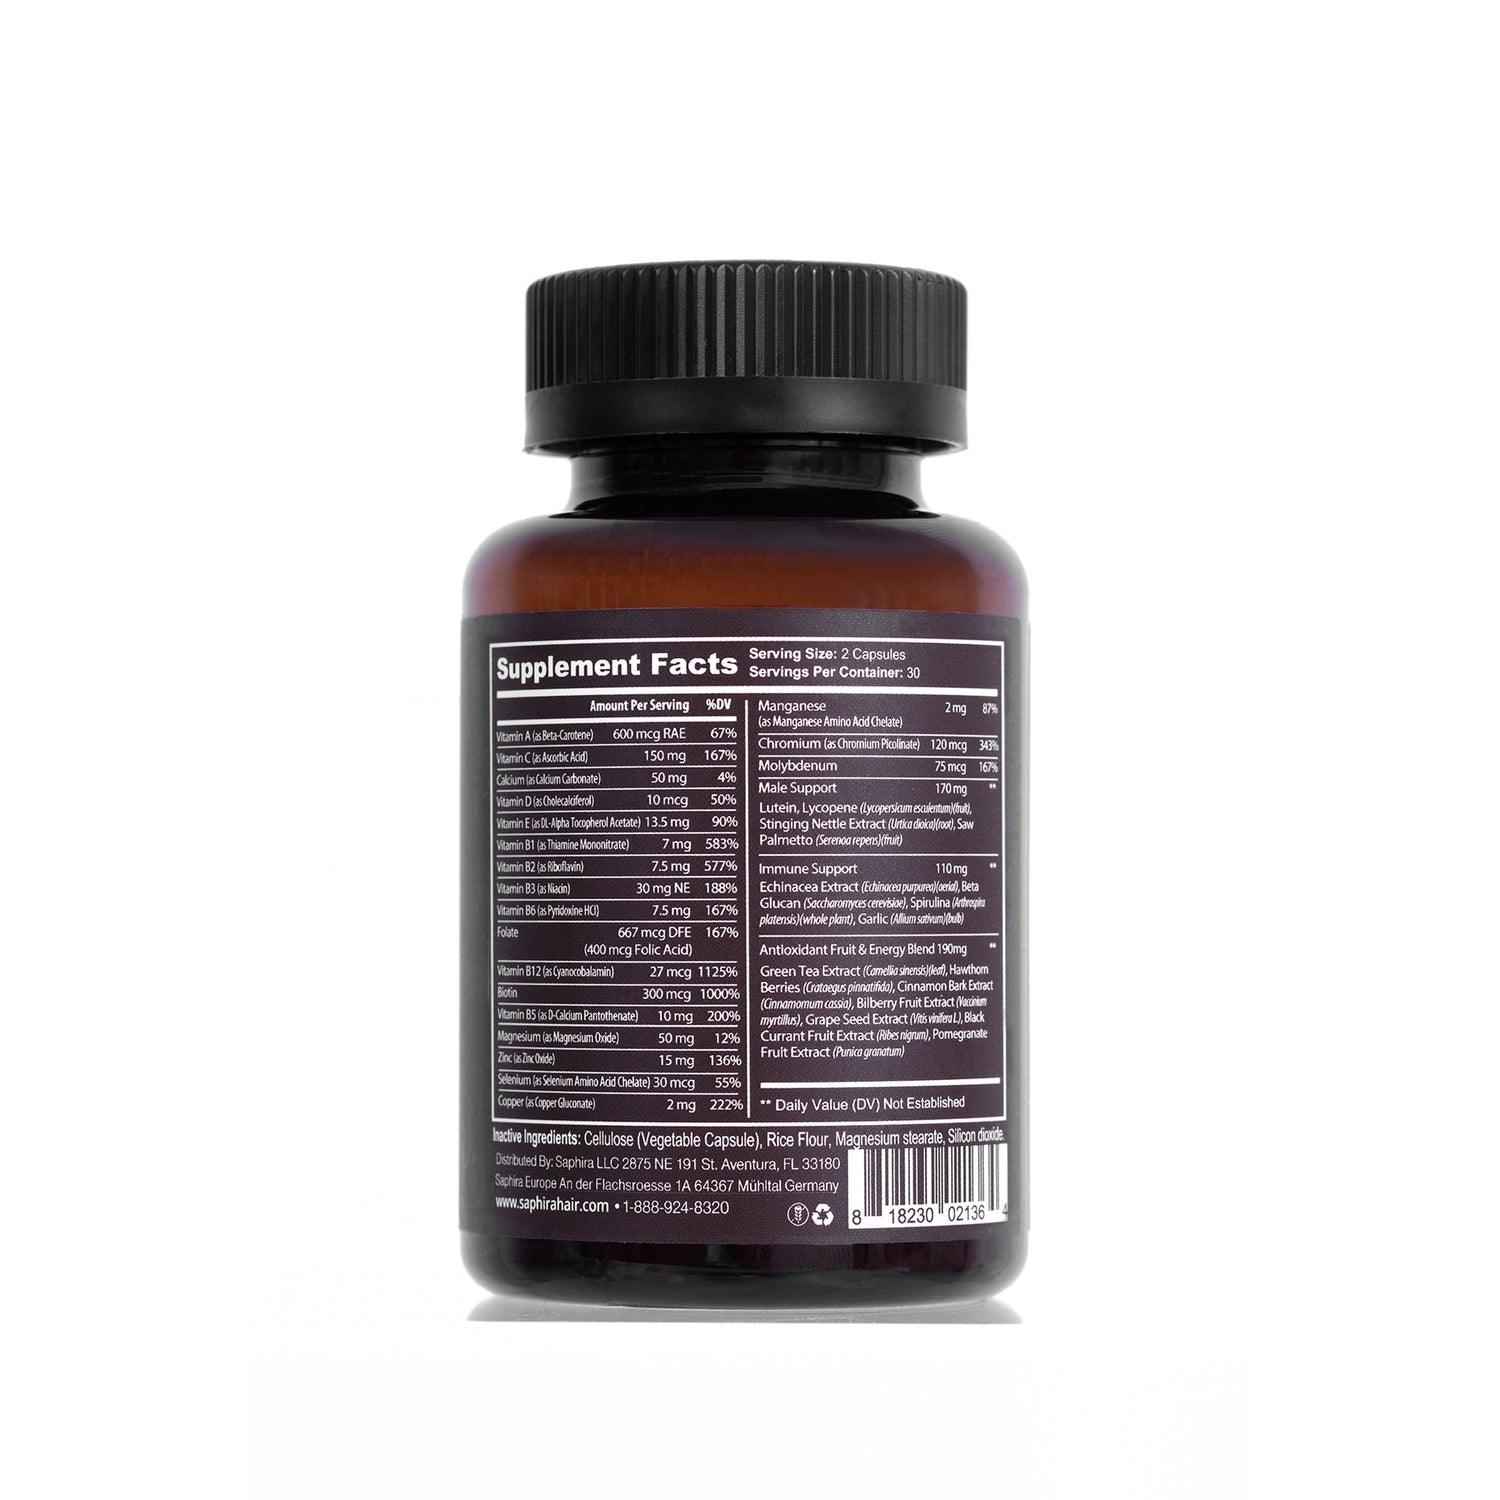 Ingredients List, Vitamins & Minerals used in Hair Support Supplement